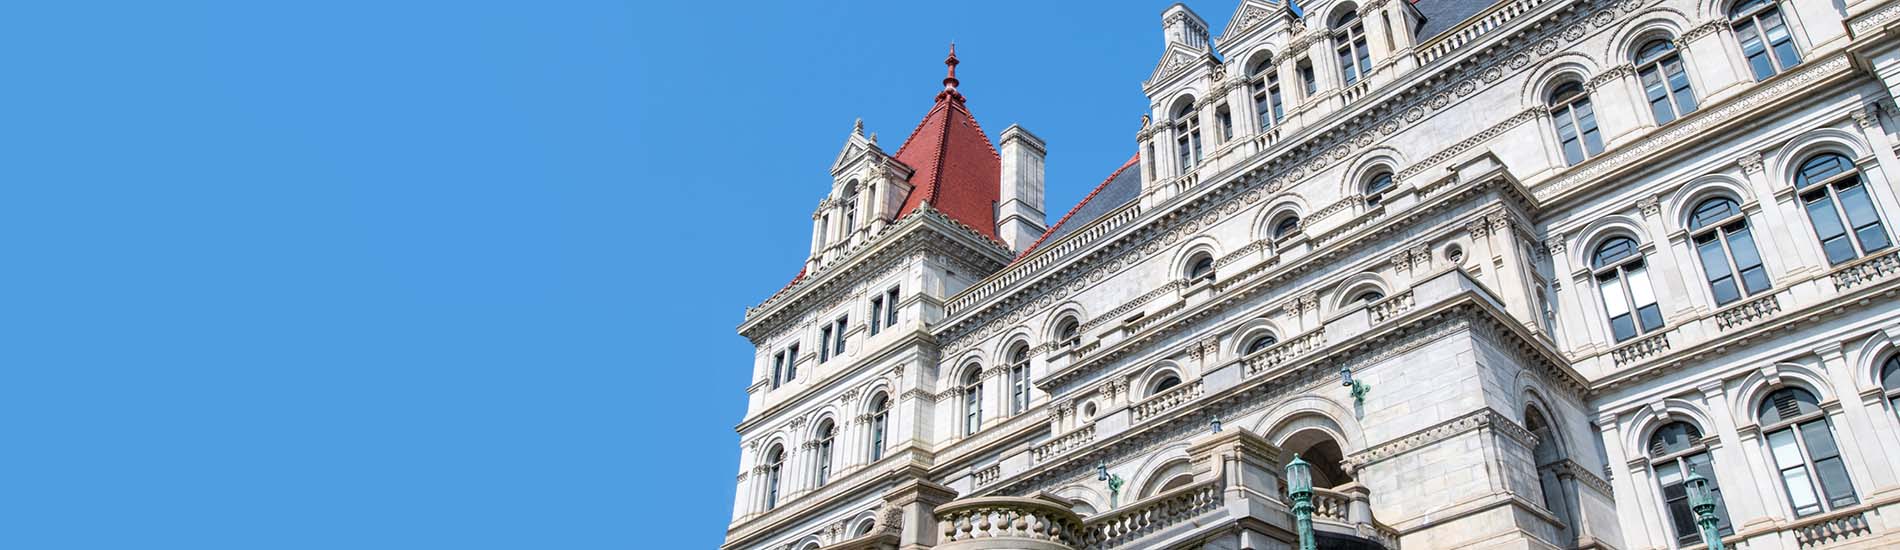 A closeup image of the New York State capitol building.